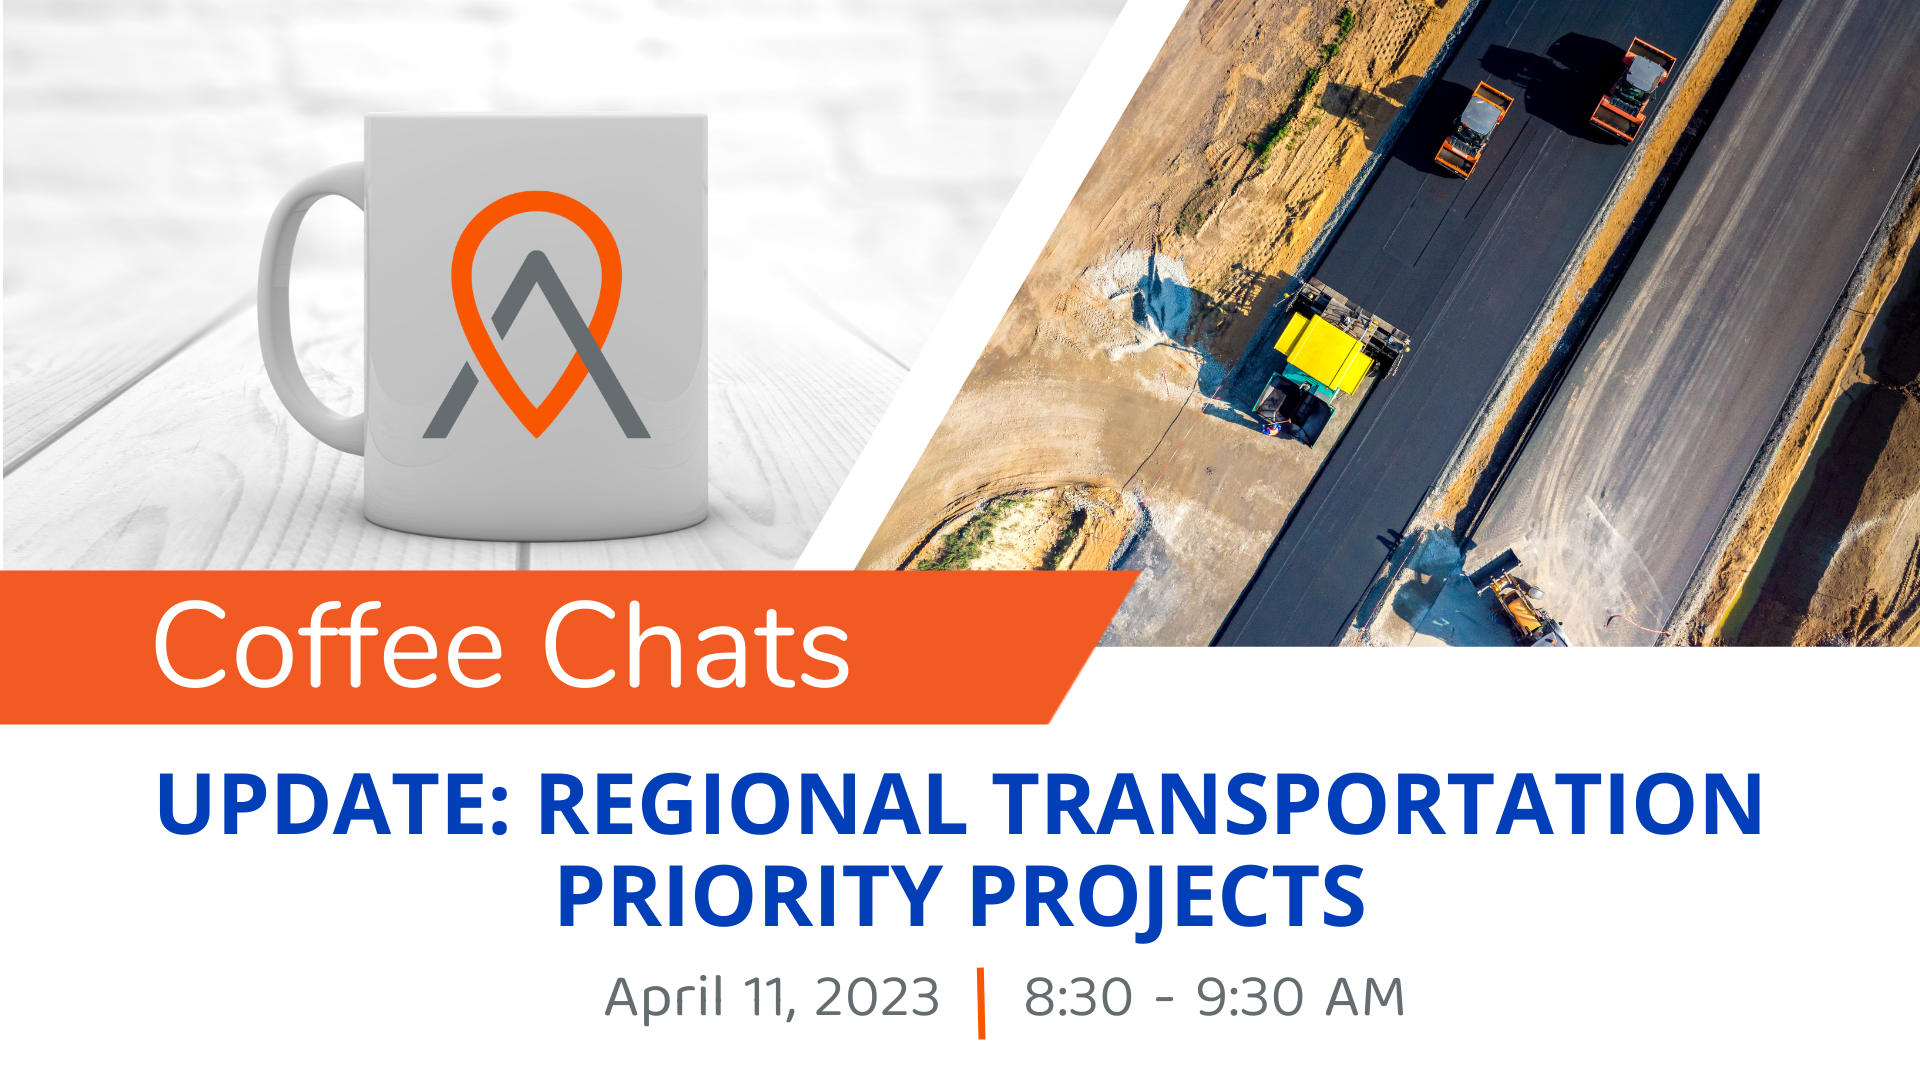 Event Promo Photo For Coffee Chats - Regional Transportation Priority Projects Update